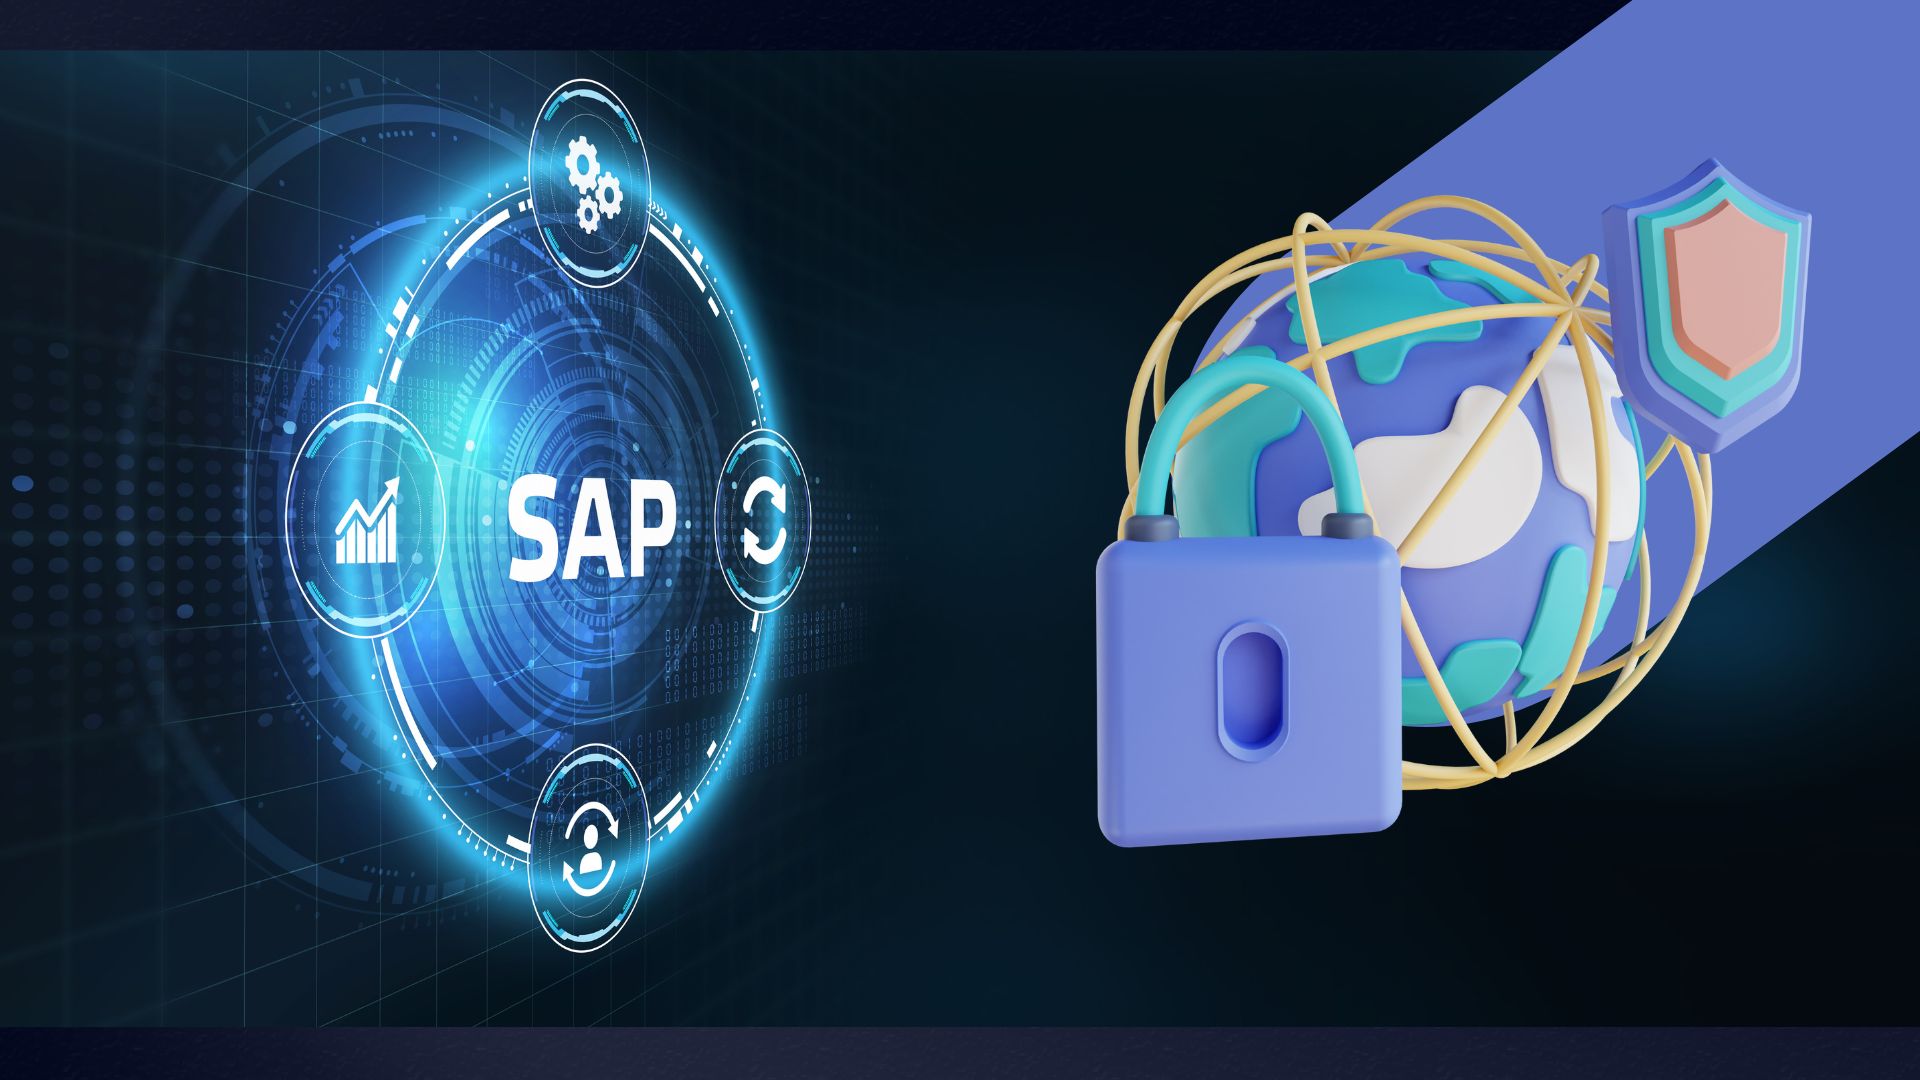 Future-Proofing Your Business: SAP Security Tools to Consider